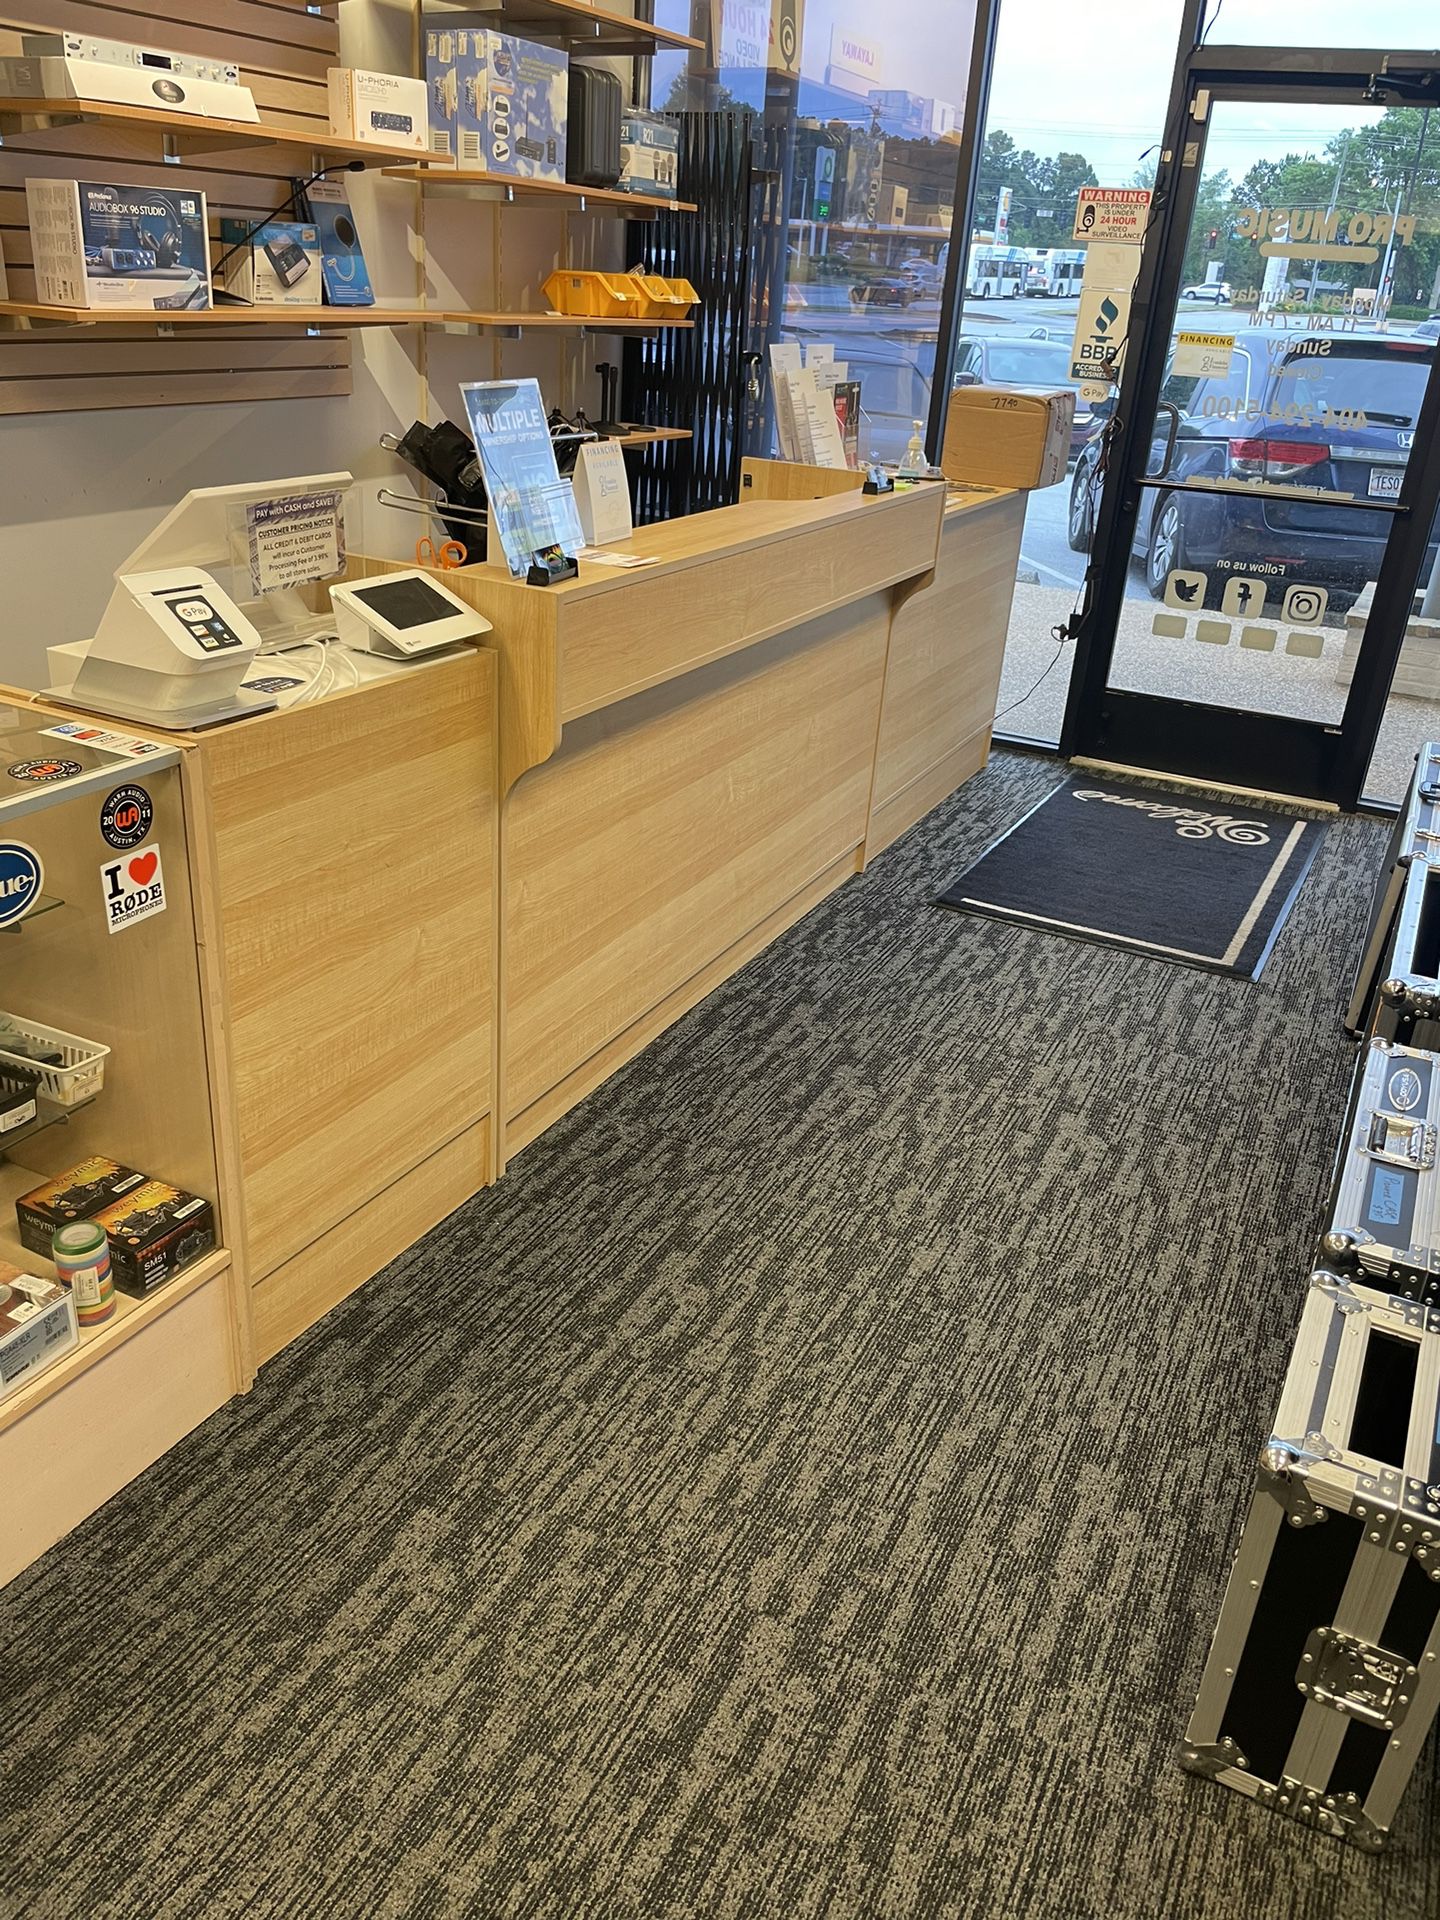 Retail Store Check Out Counter